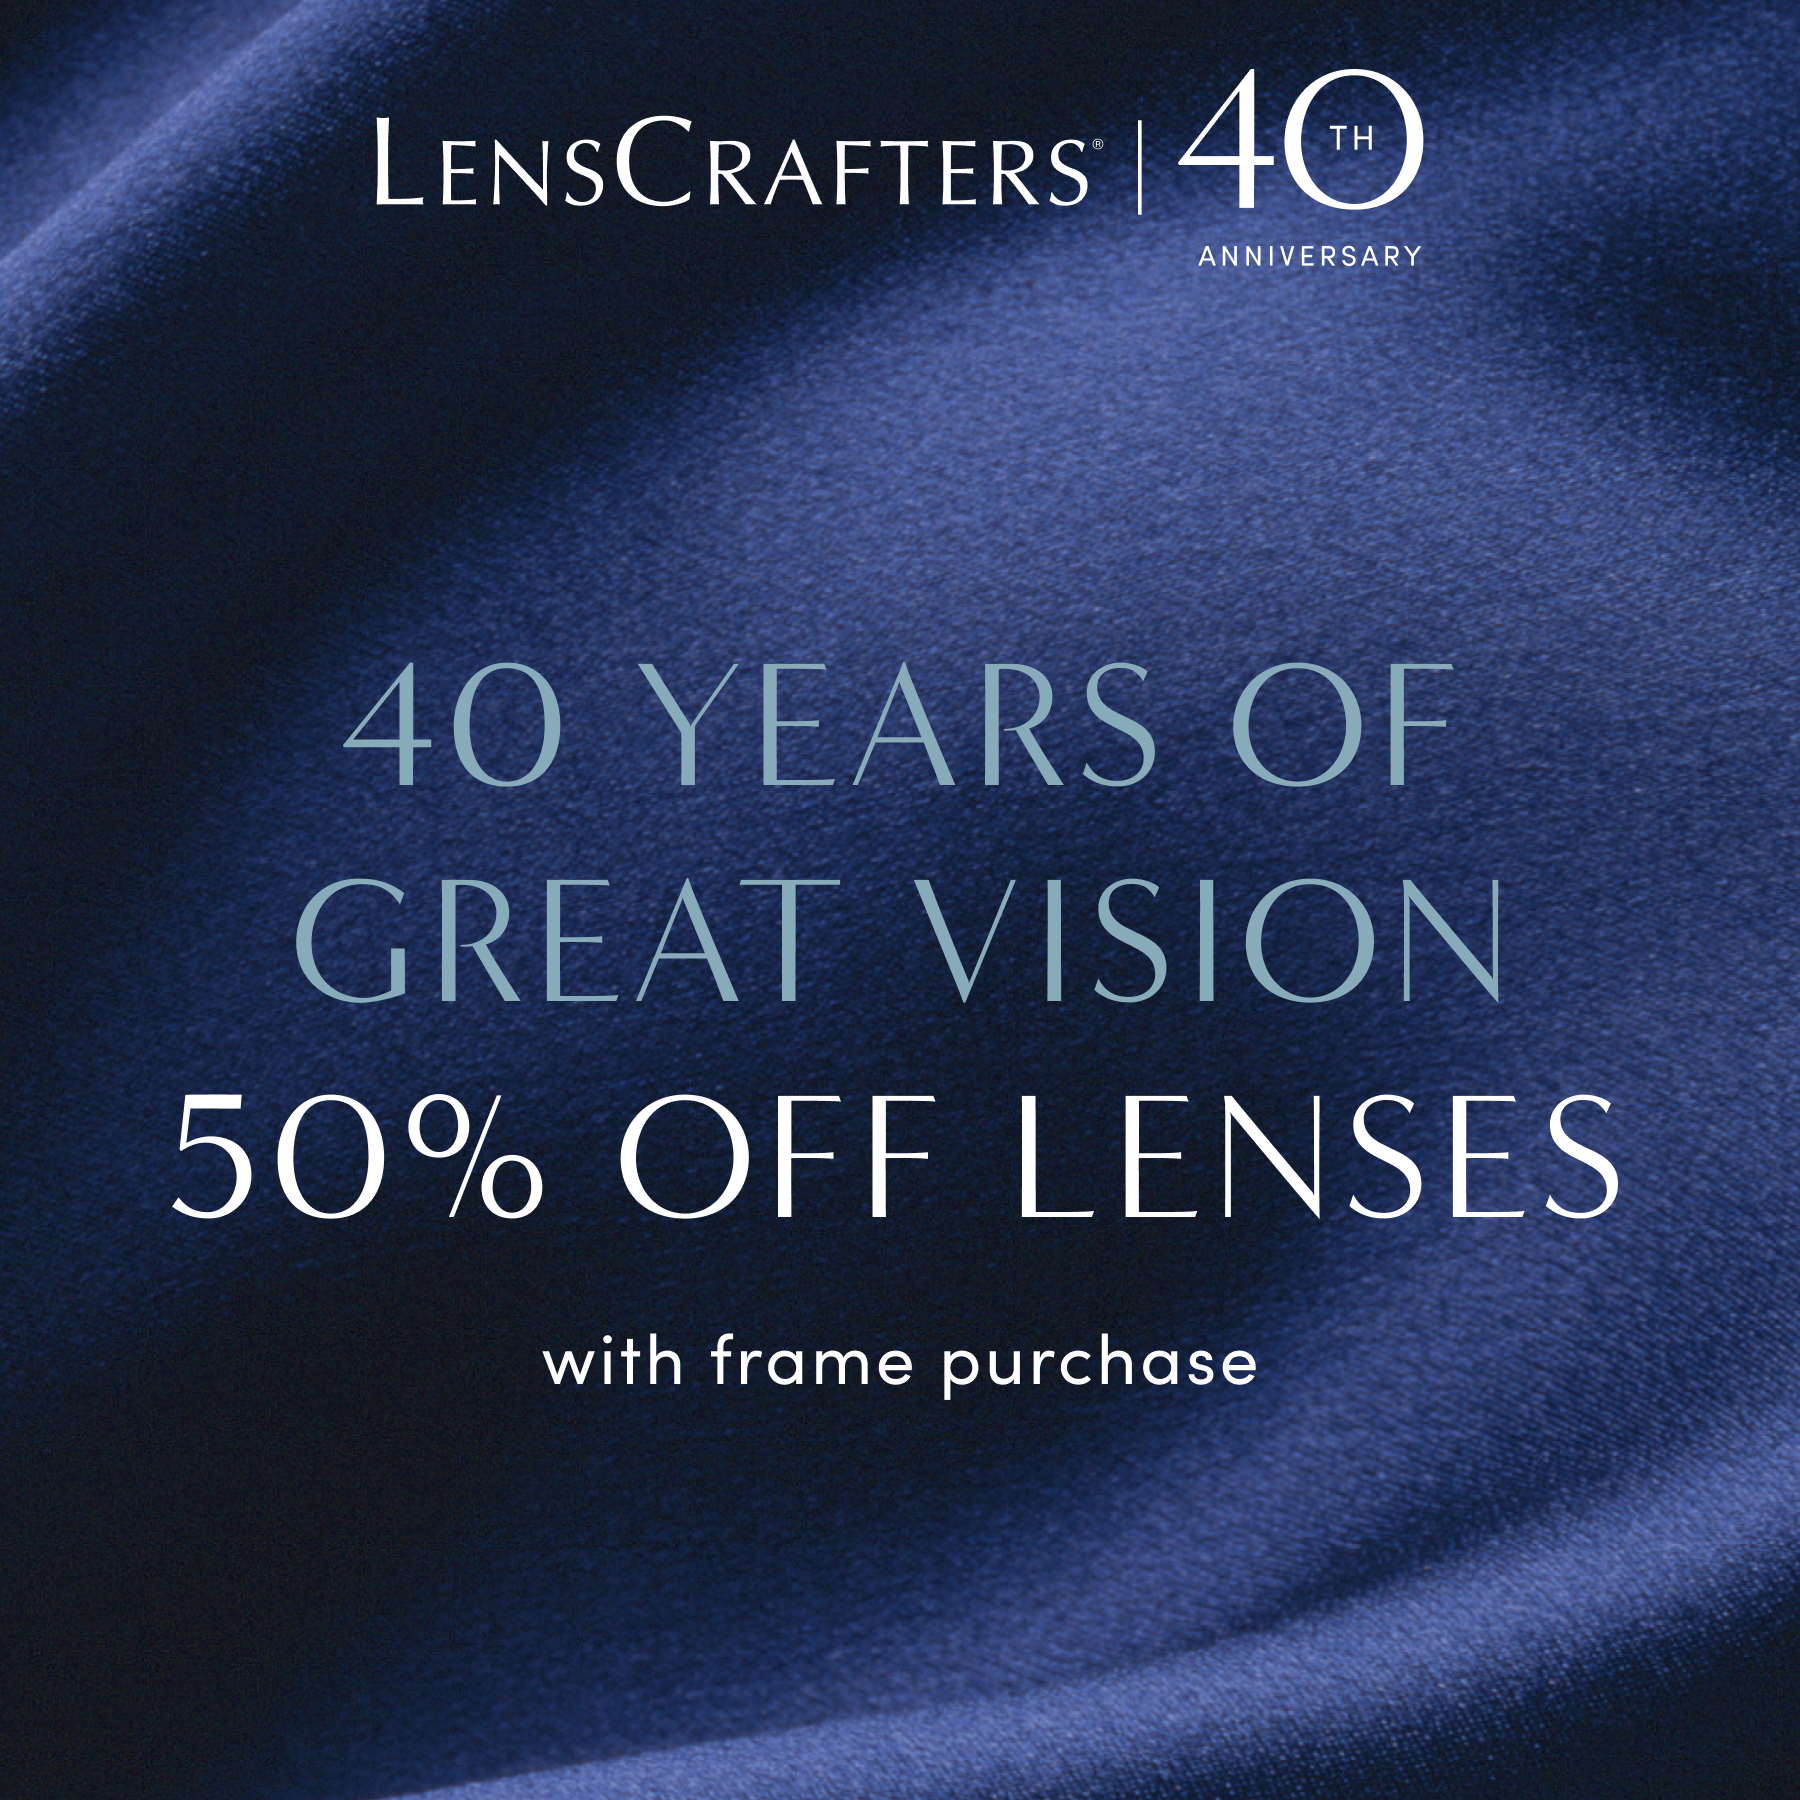 40 years of great vision at lenscrafters